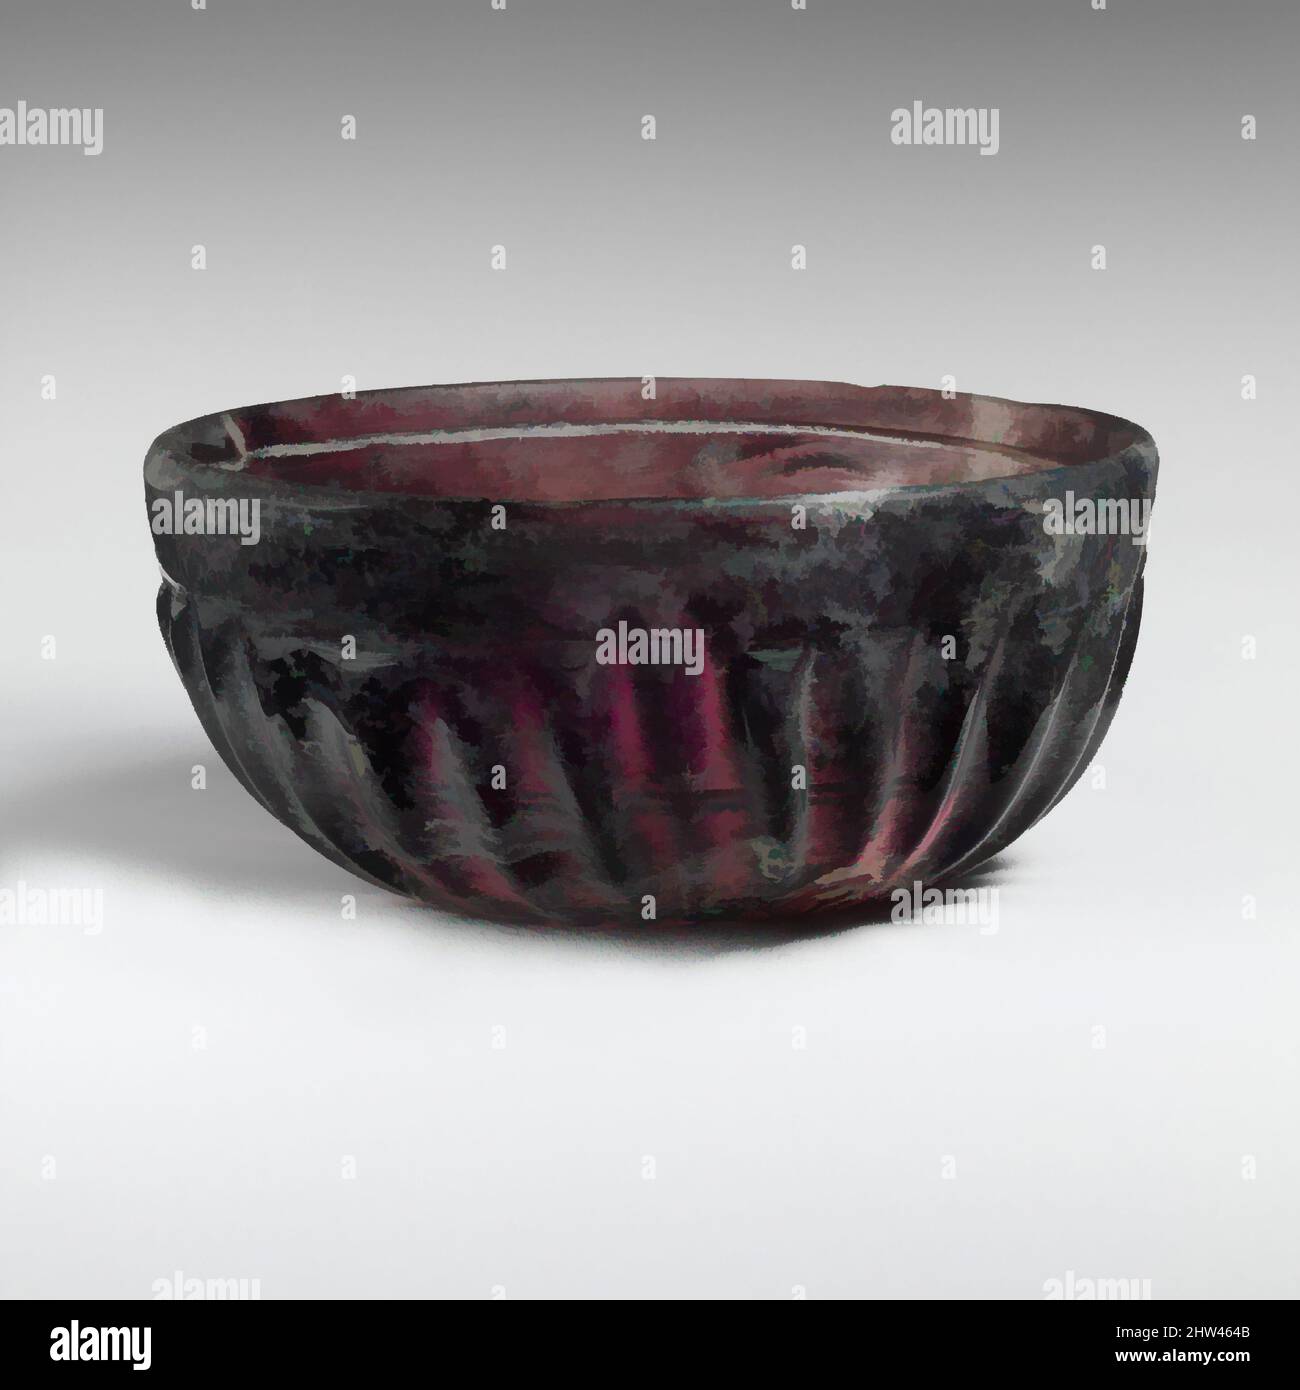 Art inspired by Glass ribbed bowl, Early Imperial, late 1st century B.C.–mid-1st century A.D., Roman, Syro-Palestinian or Italian, Glass; cast, tooled, and cut, H.: 2 3/16 in. (5.6 cm), Glass, Translucent purple with colorless streaks. Plain vertical rounded and partly uneven rim, Classic works modernized by Artotop with a splash of modernity. Shapes, color and value, eye-catching visual impact on art. Emotions through freedom of artworks in a contemporary way. A timeless message pursuing a wildly creative new direction. Artists turning to the digital medium and creating the Artotop NFT Stock Photo